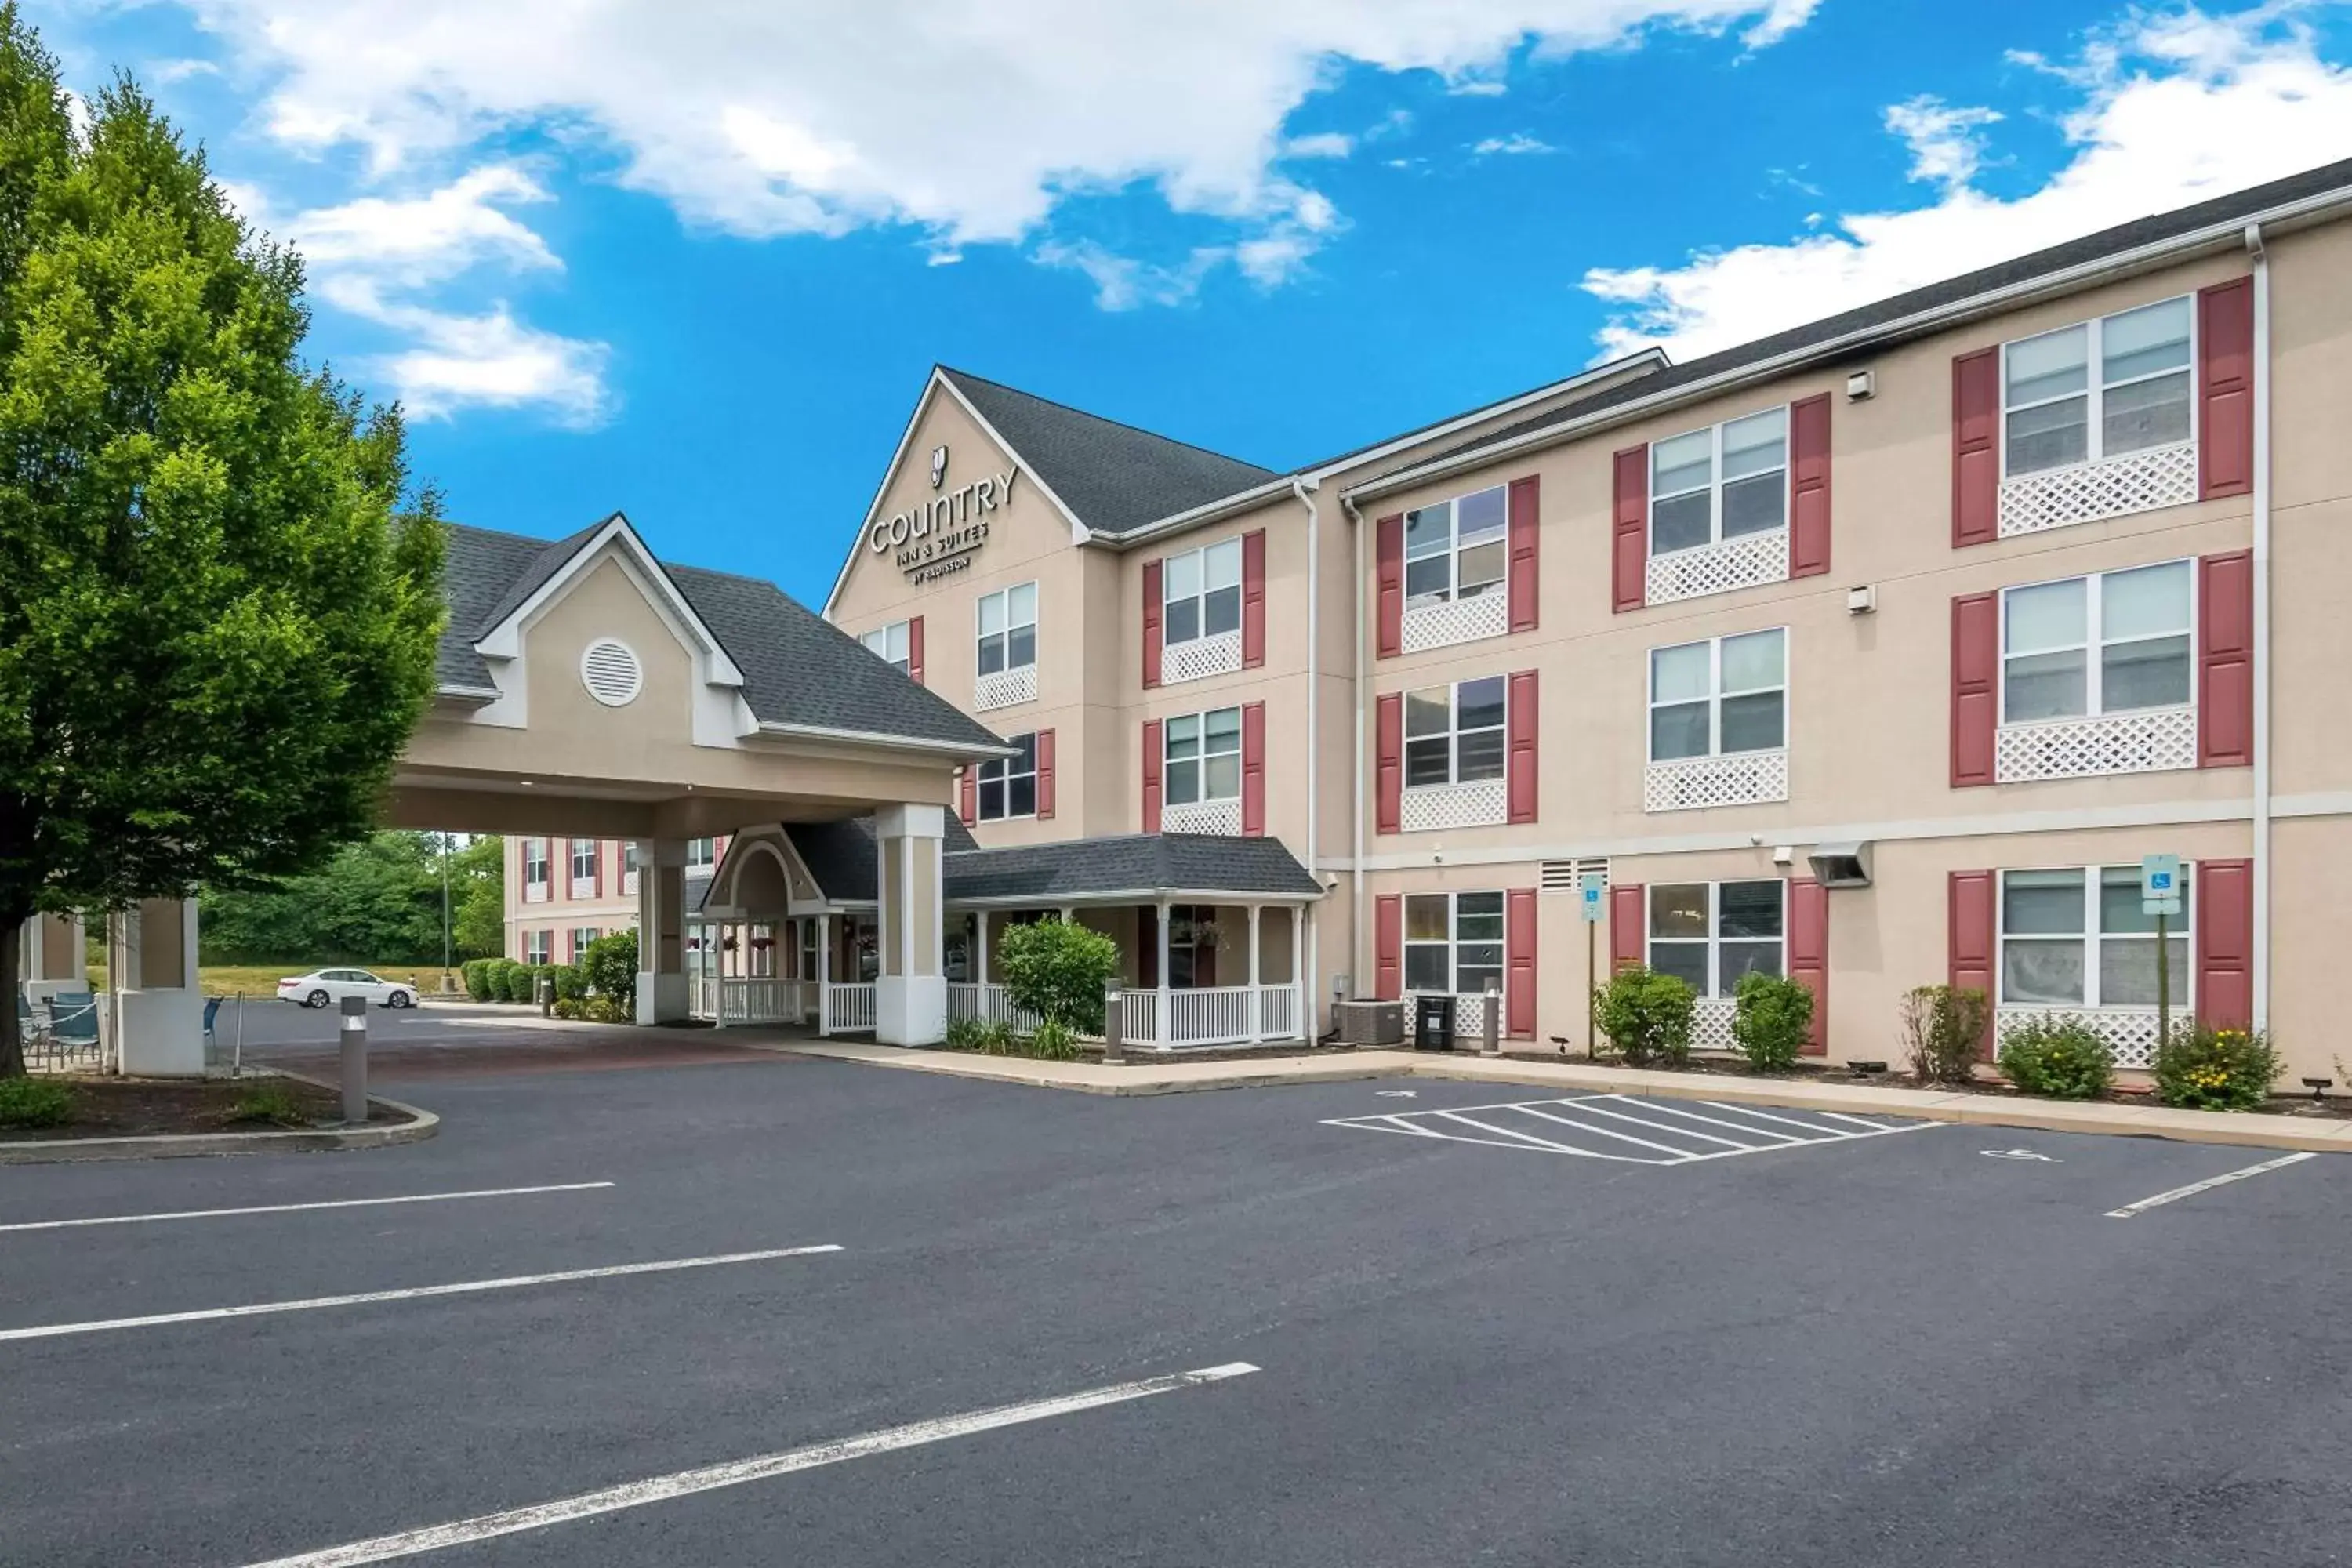 Property Building in Country Inn & Suites by Radisson, Harrisburg Northeast (Hershey), PA